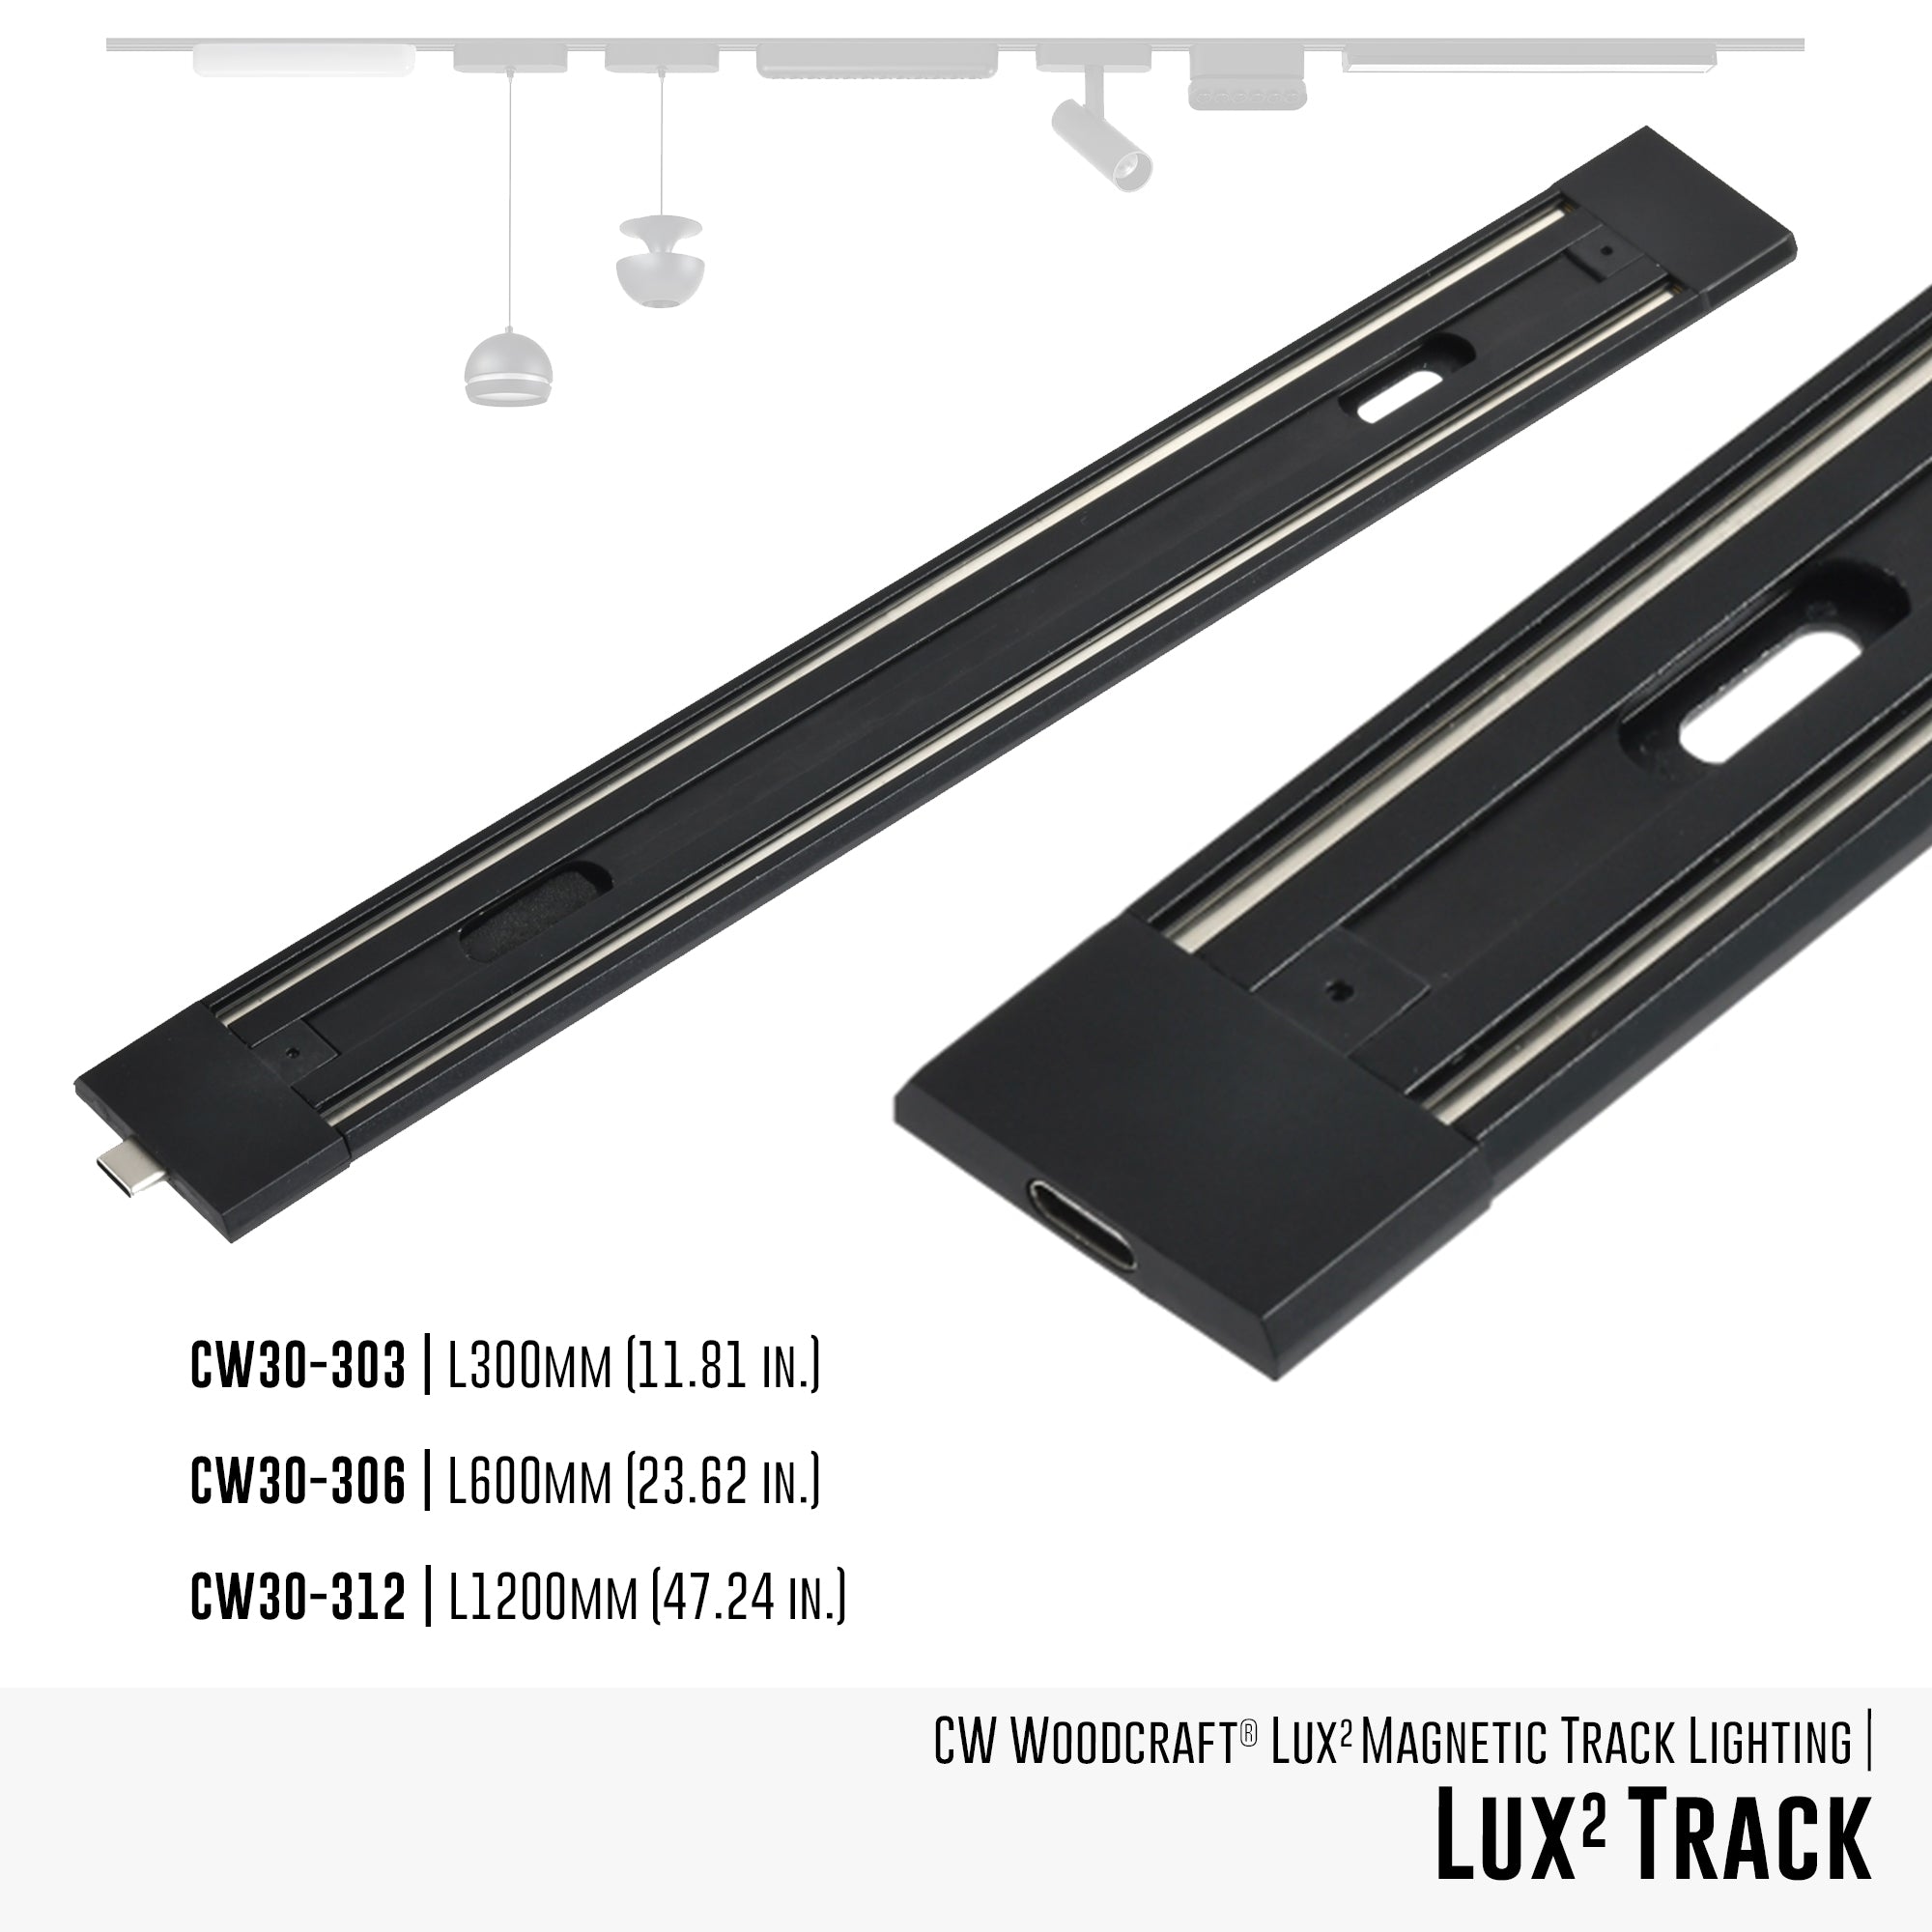 LUX 2 MAGNETIC LIGHTING SYSTEM | Track